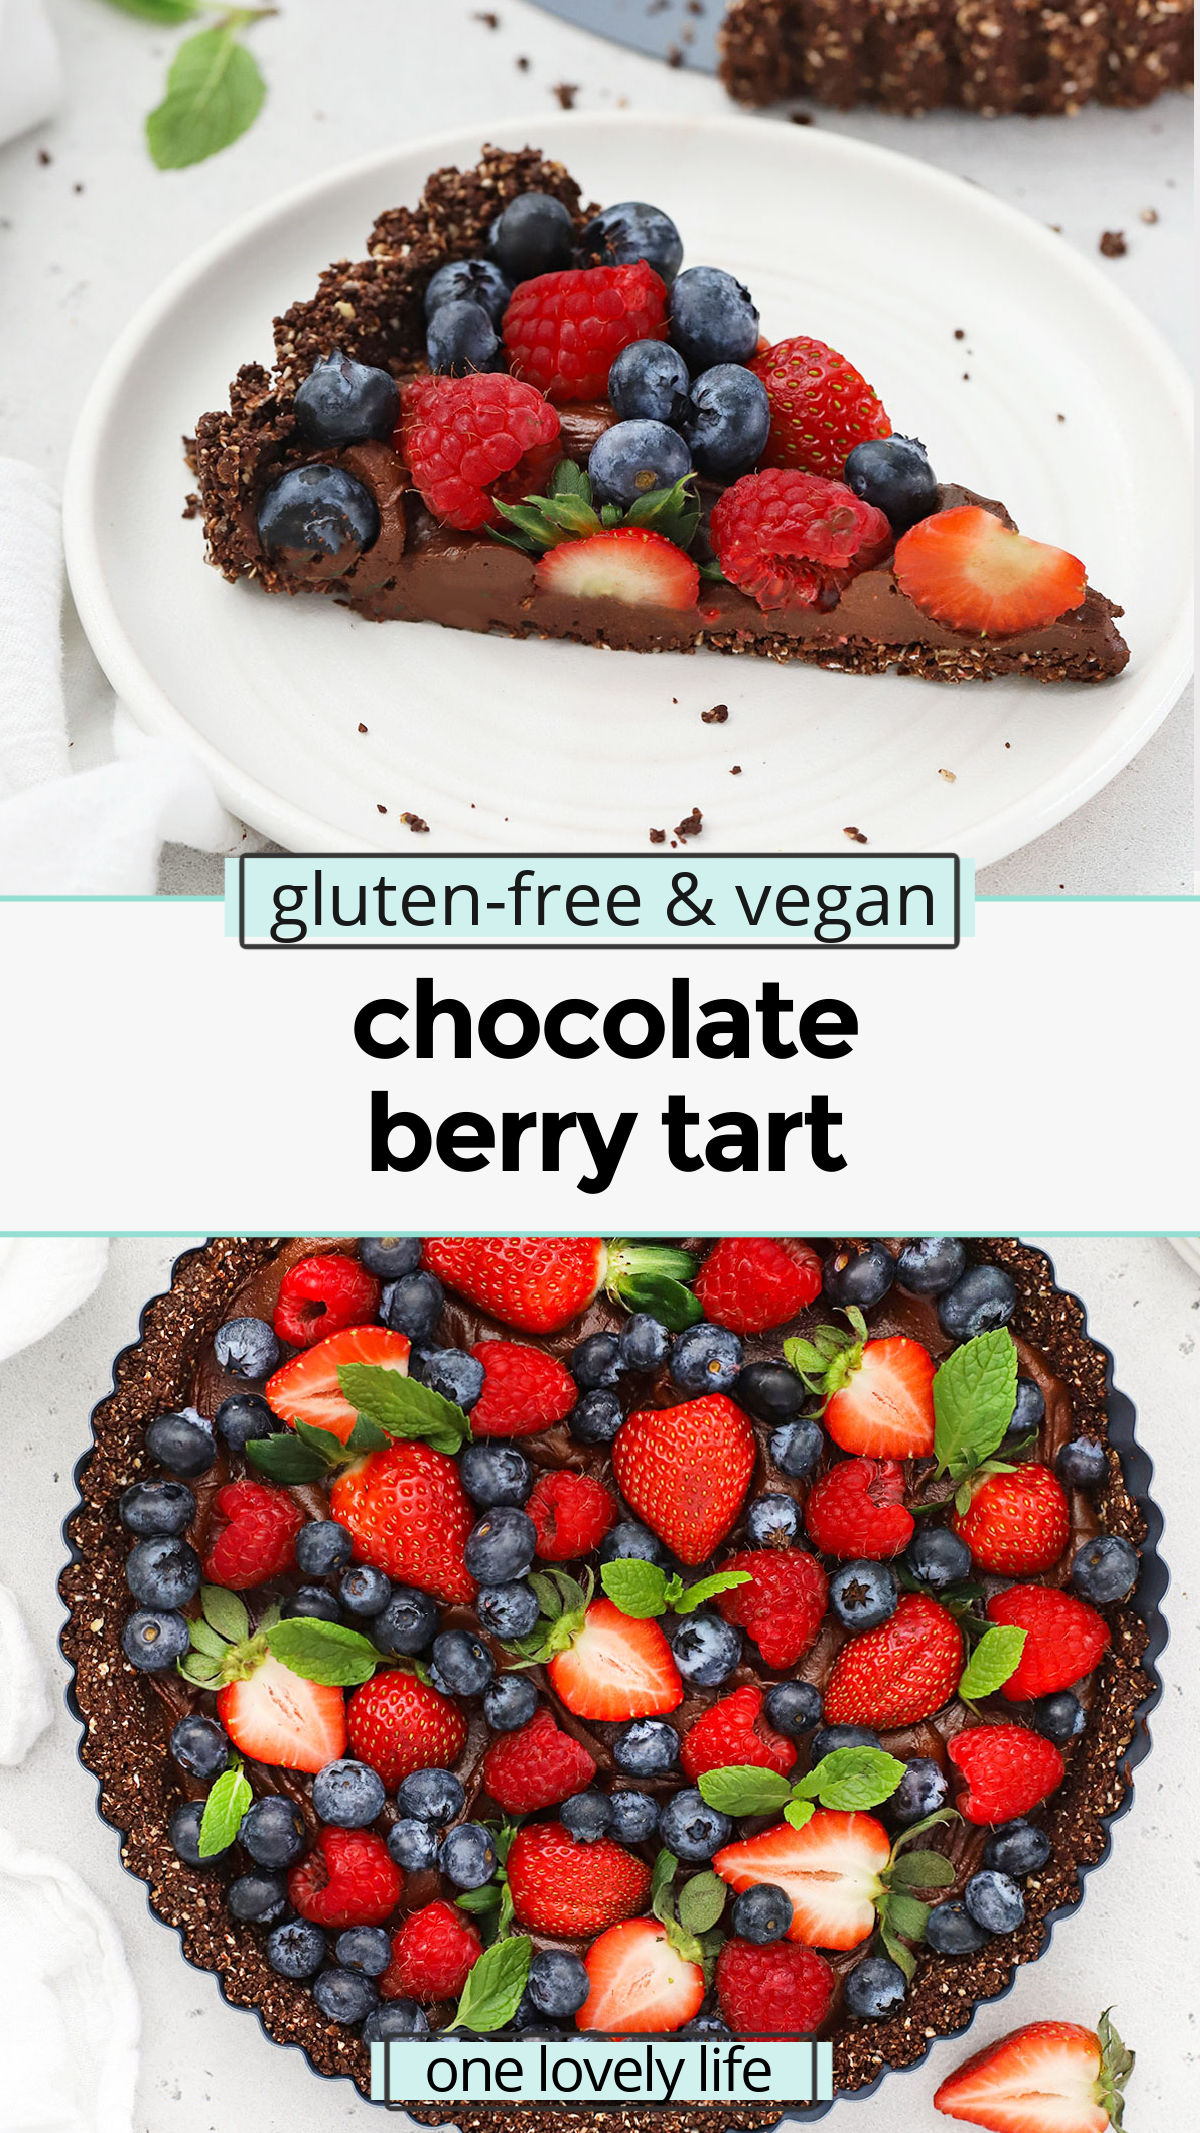 No Bake Chocolate Berry Tart - This gluten free vegan chocolate tart tastes so fresh and luscious. It's gluten free, dairy free, refined sugar free, and really makes a statement. The belle of the ball at any dinner or party! // Dairy free chocolate tart // gluten free chocolate tart // no bake desserts // Valentine's Day Dessert // healthy chocolate tart // no bake chocolate tart // gluten-free chocolate berry tart // dairy free chocolate tart recipe // valentine's day dessert